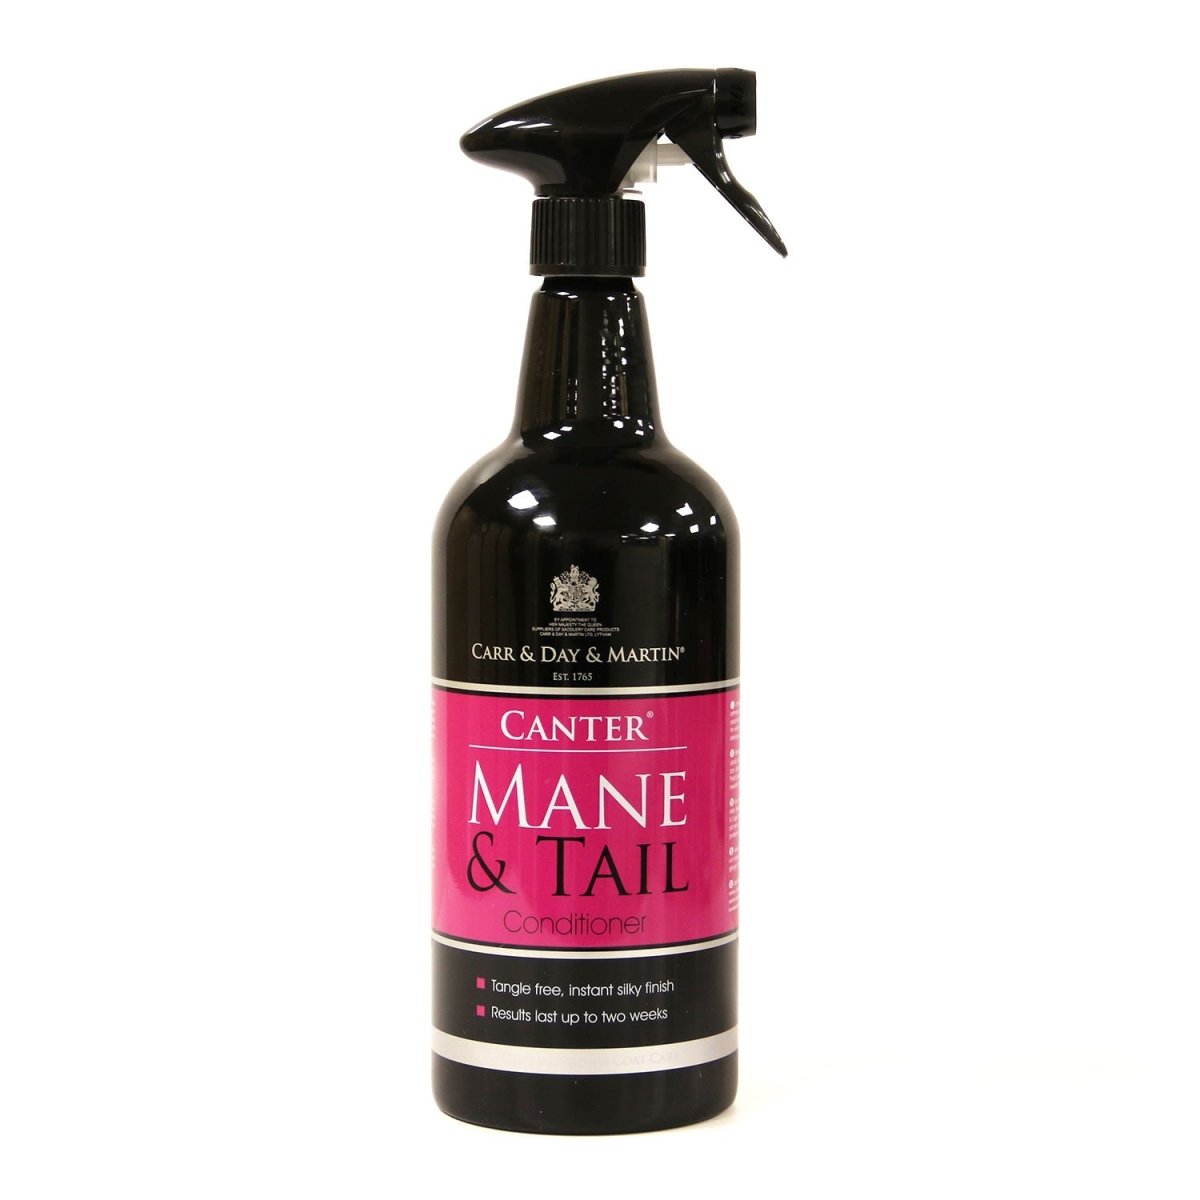 Carr & Day & Martin Canter Mane & Tail Conditioner Spray - 1Lt -